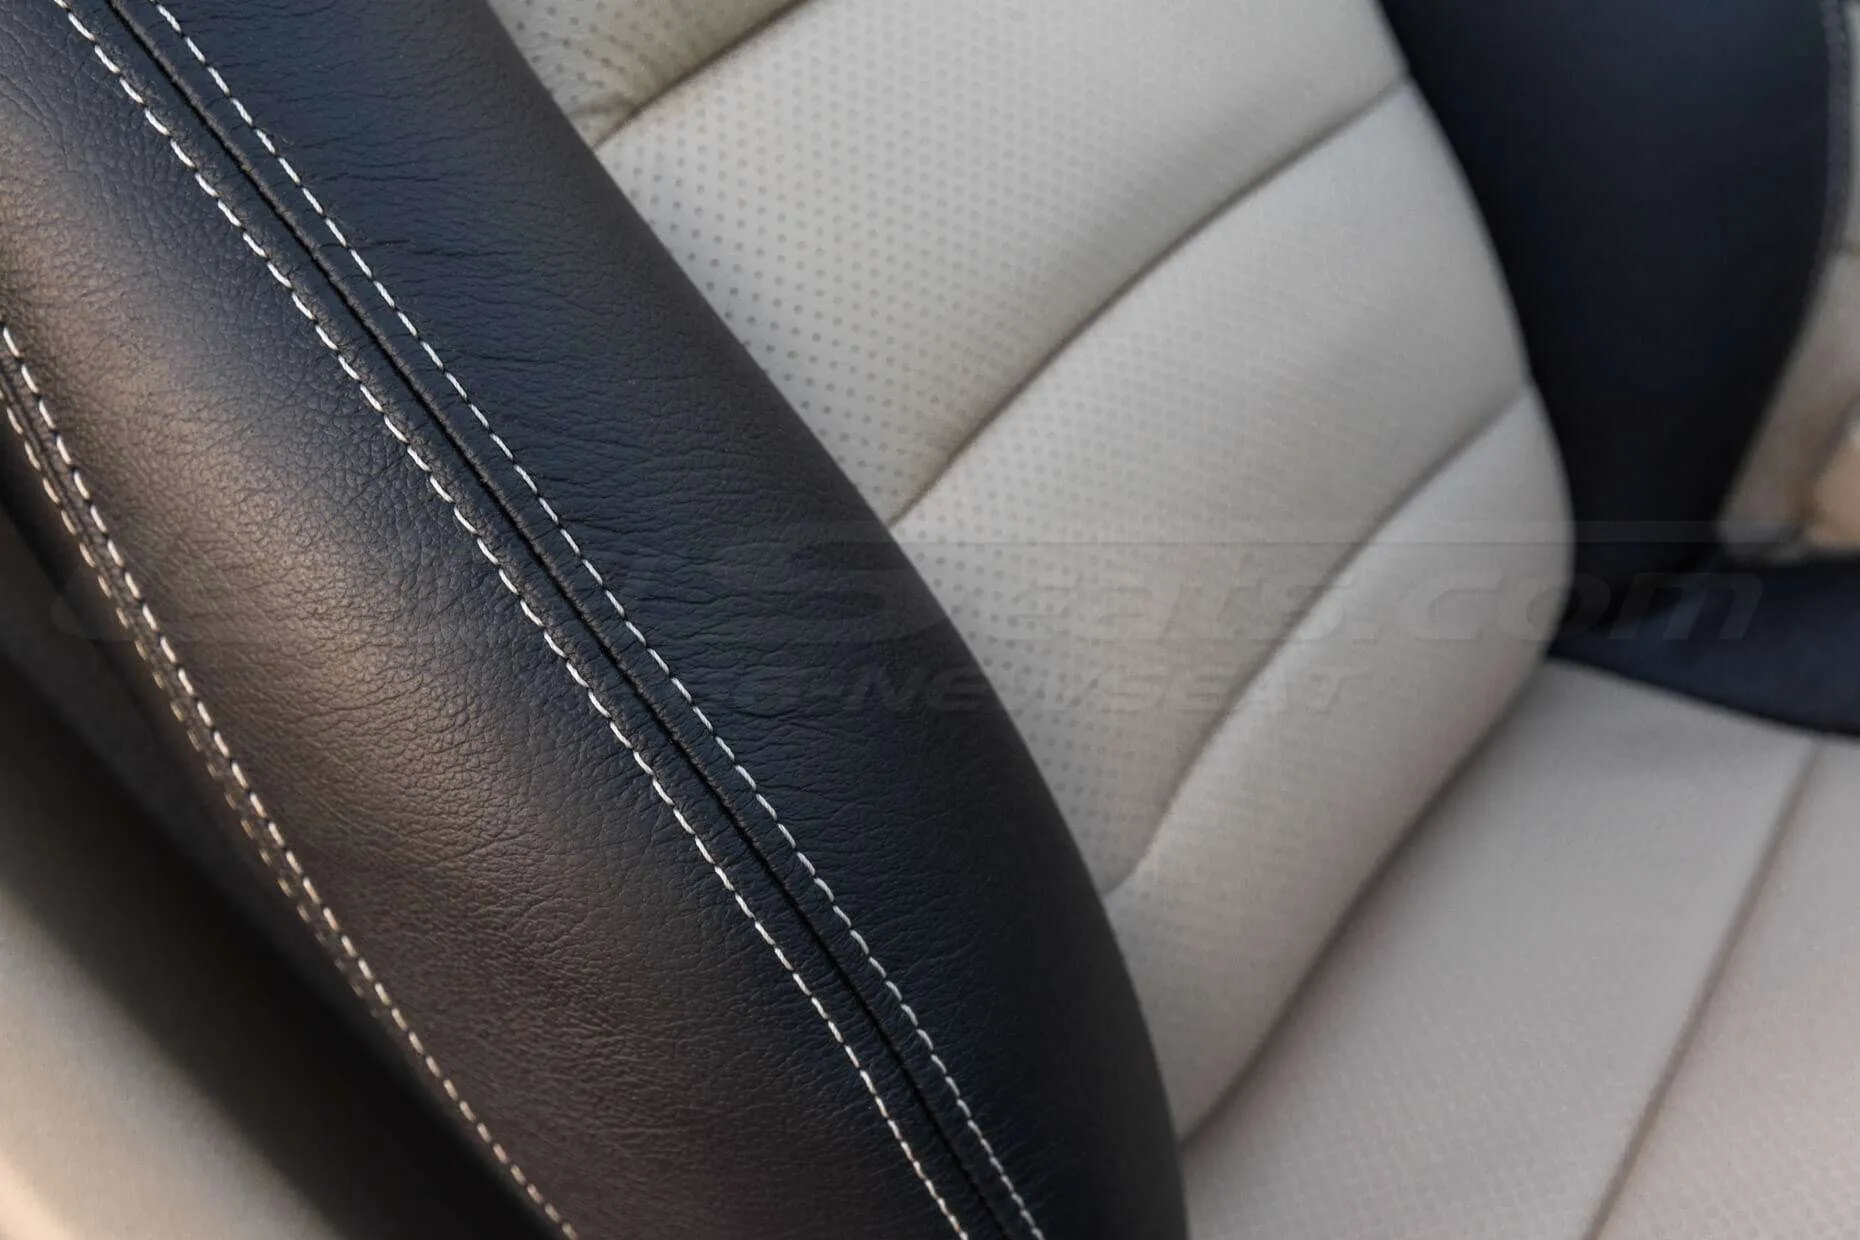 Installed 05-11 Chevrolet Corvette Leather Kit - Black & Sandstone - Perforation and side double-stitching